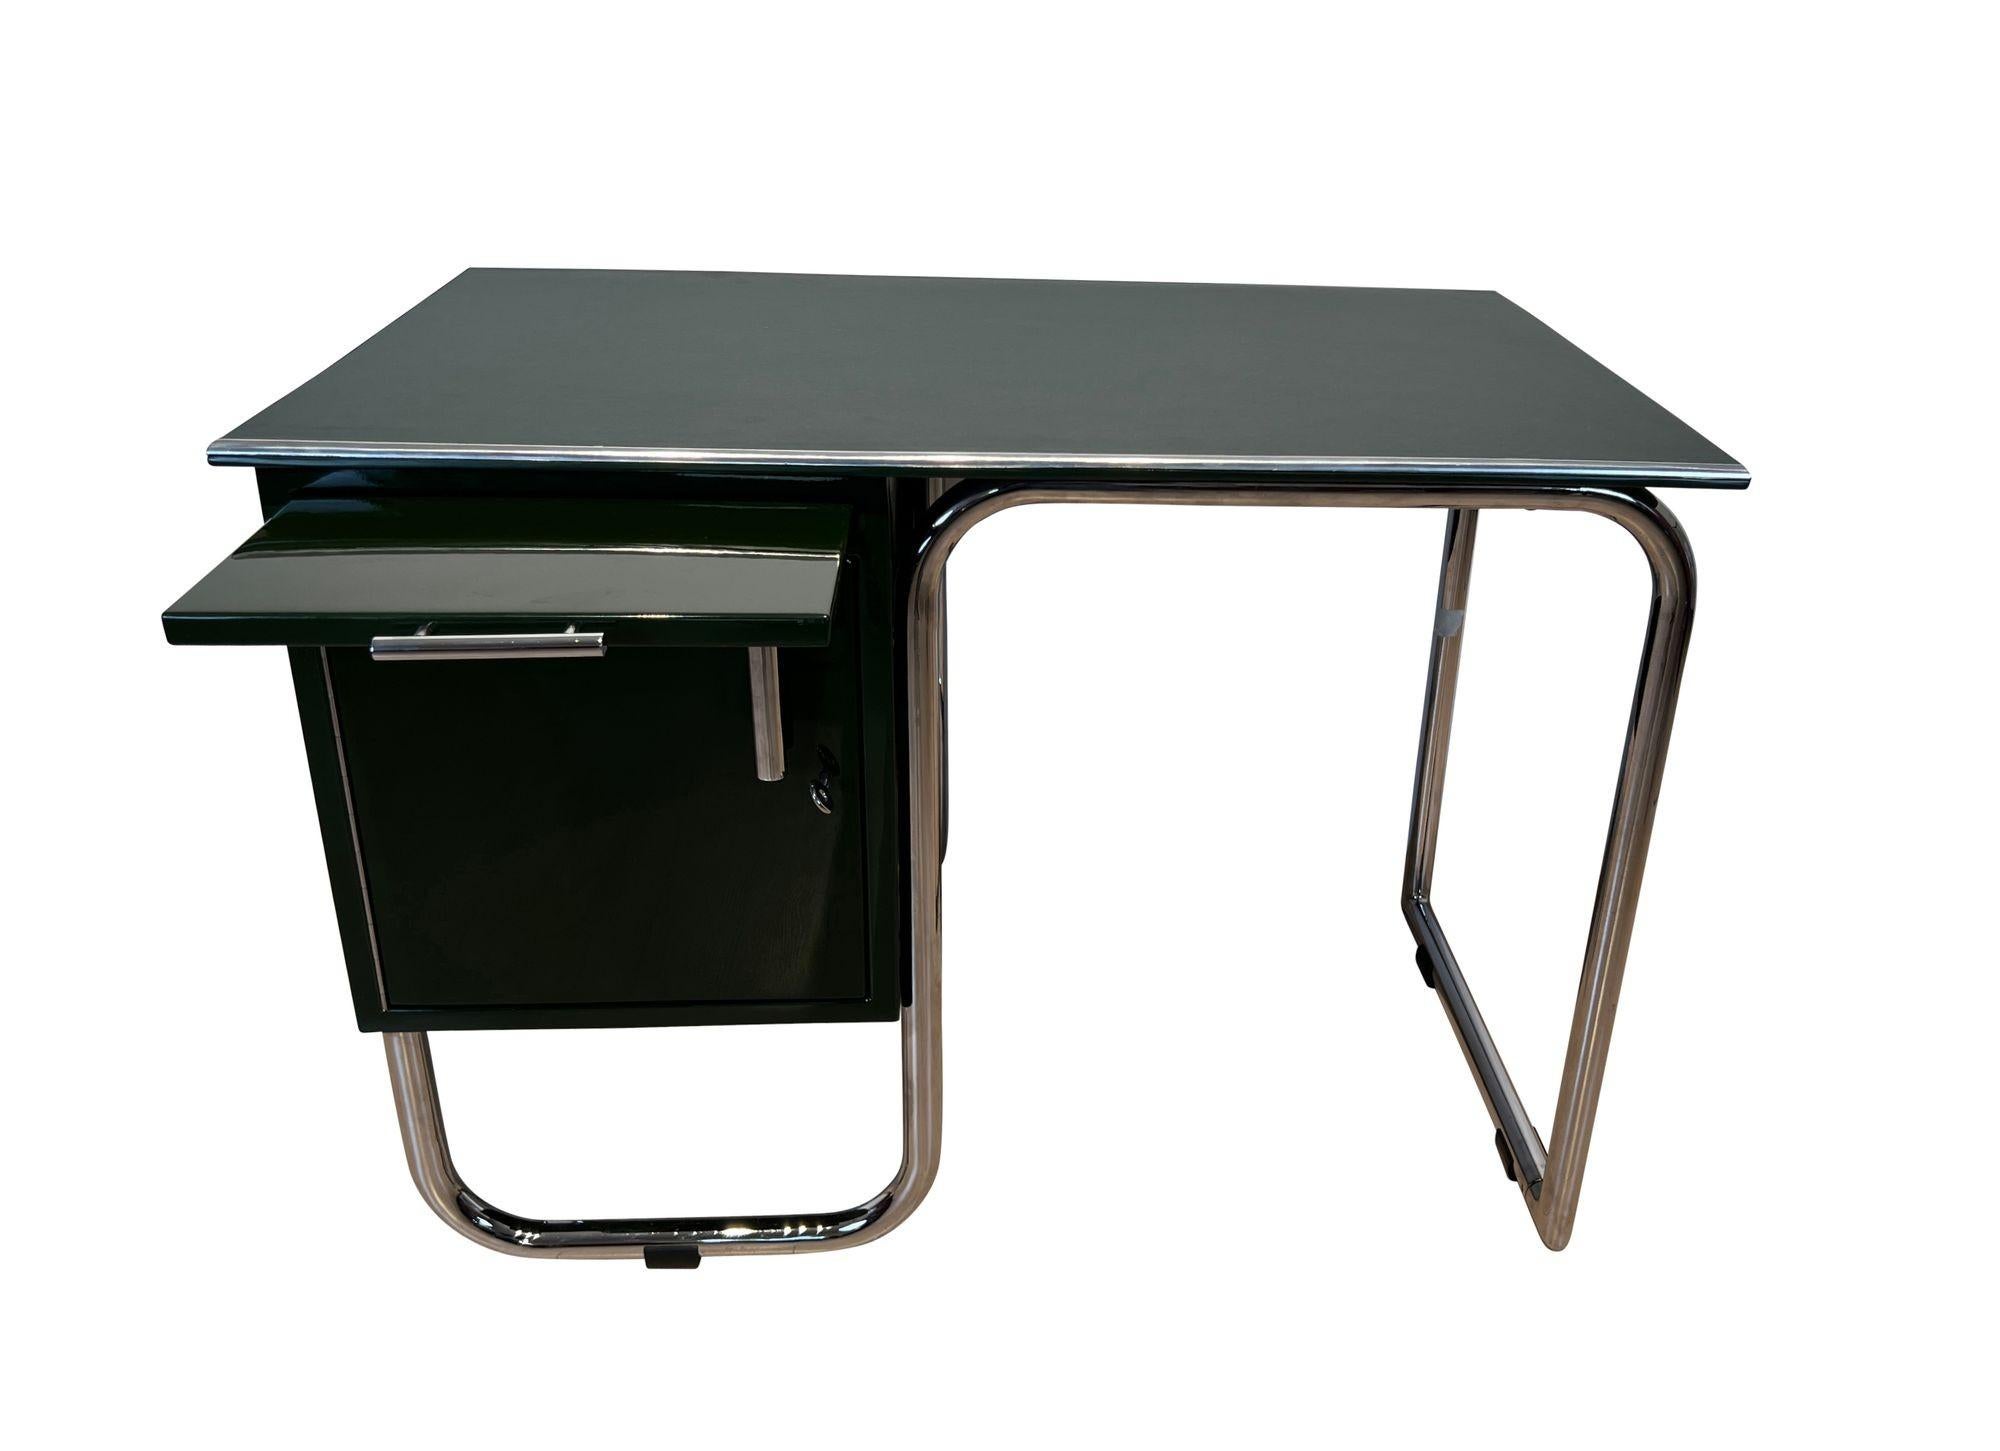 Bauhaus Metal and Steeltube Desk, Green Lacquer, Nickel, Germany circa  1920/30 For Sale at 1stDibs